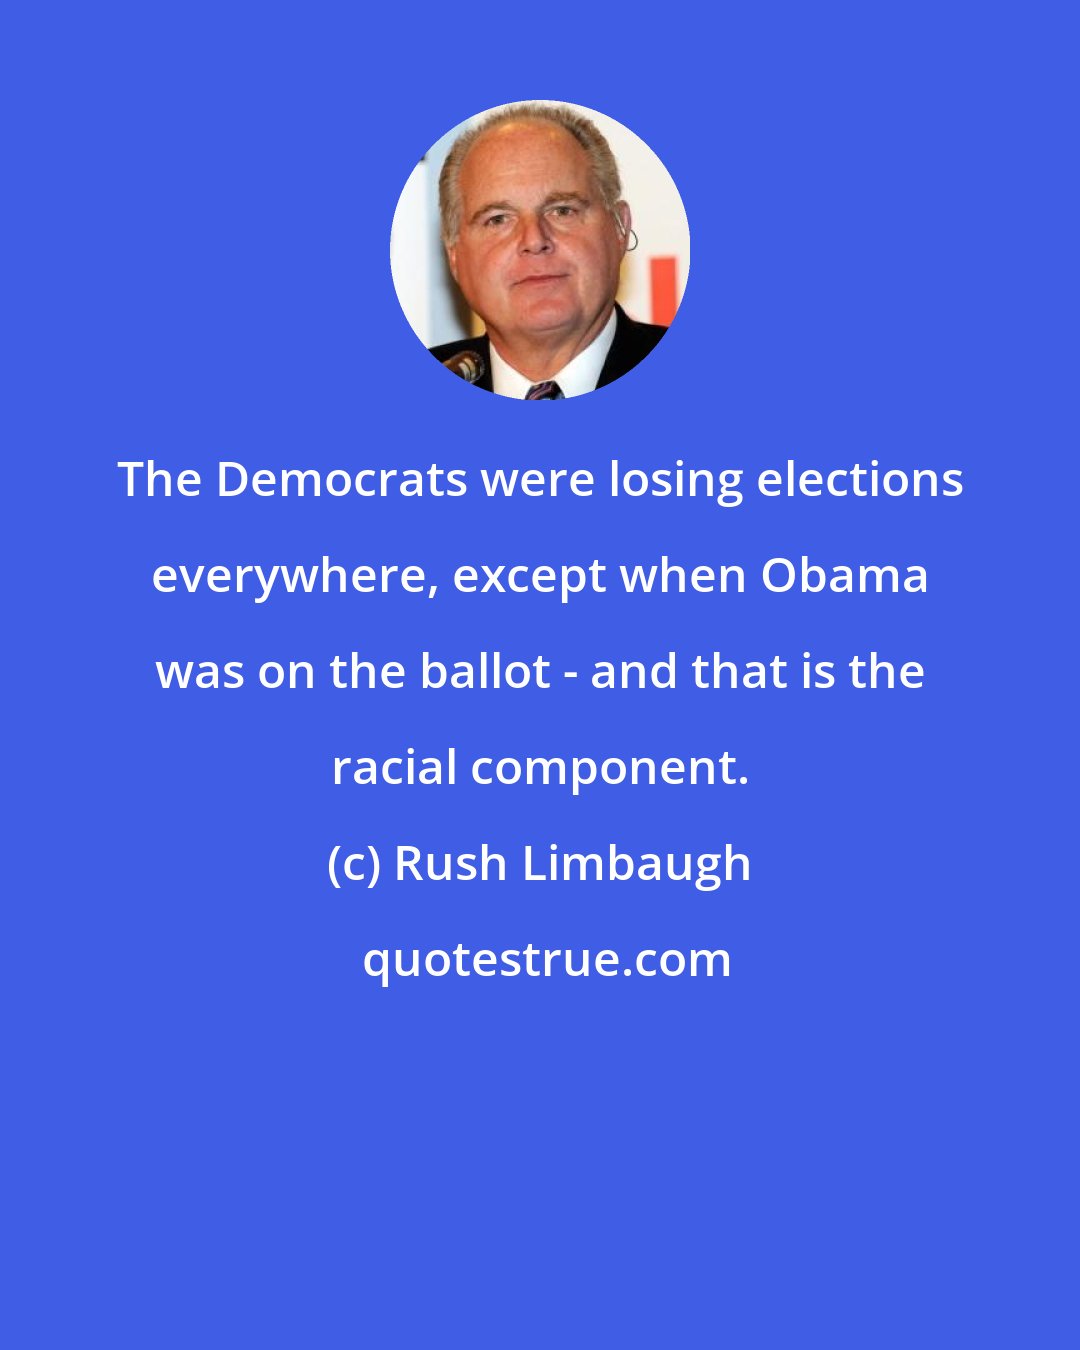 Rush Limbaugh: The Democrats were losing elections everywhere, except when Obama was on the ballot - and that is the racial component.